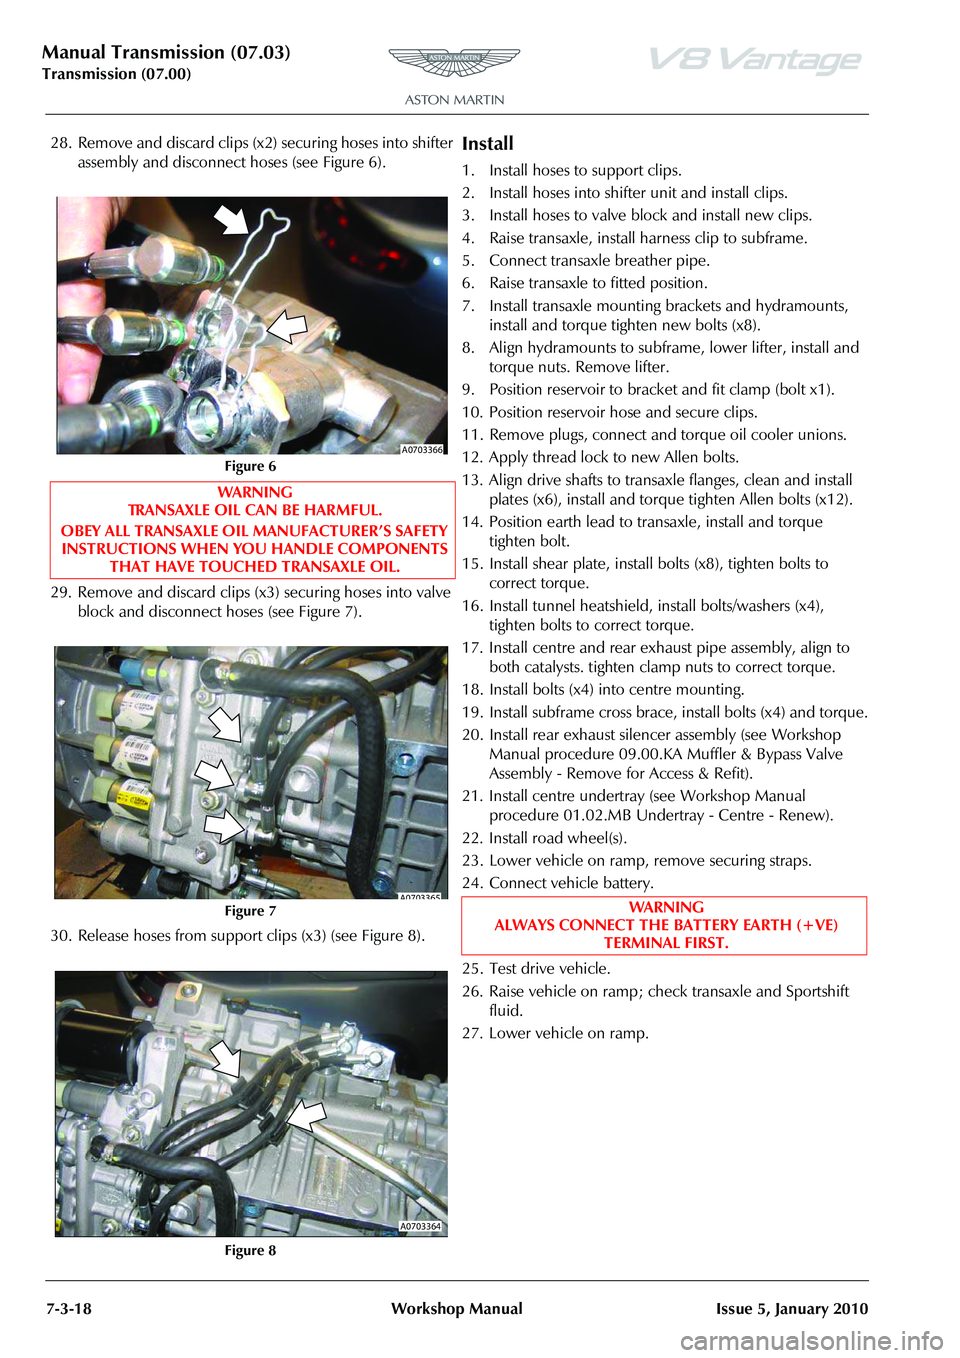 ASTON MARTIN V8 VANTAGE 2010  Workshop Manual Manual Transmission (07.03)
Transmission (07.00)7-3-18 Workshop Manual Issue 5, January 2010
28. Remove and discard clips (x2) securing hoses into shifter  assembly and disconnect hoses (see Figure 6)